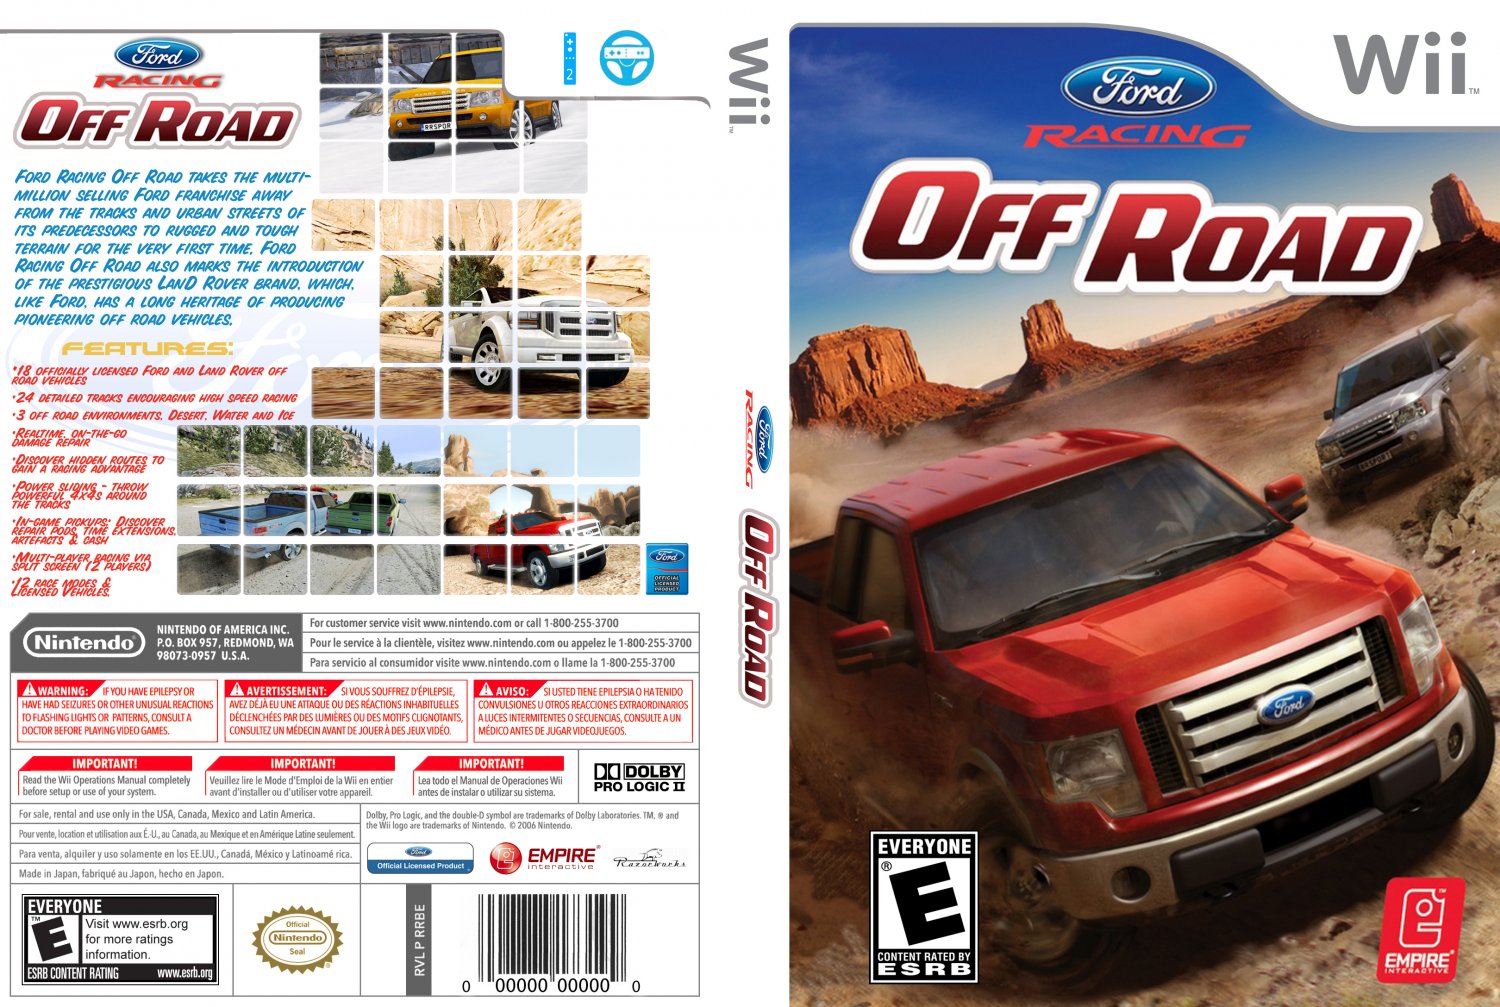 Ford off road racing wii